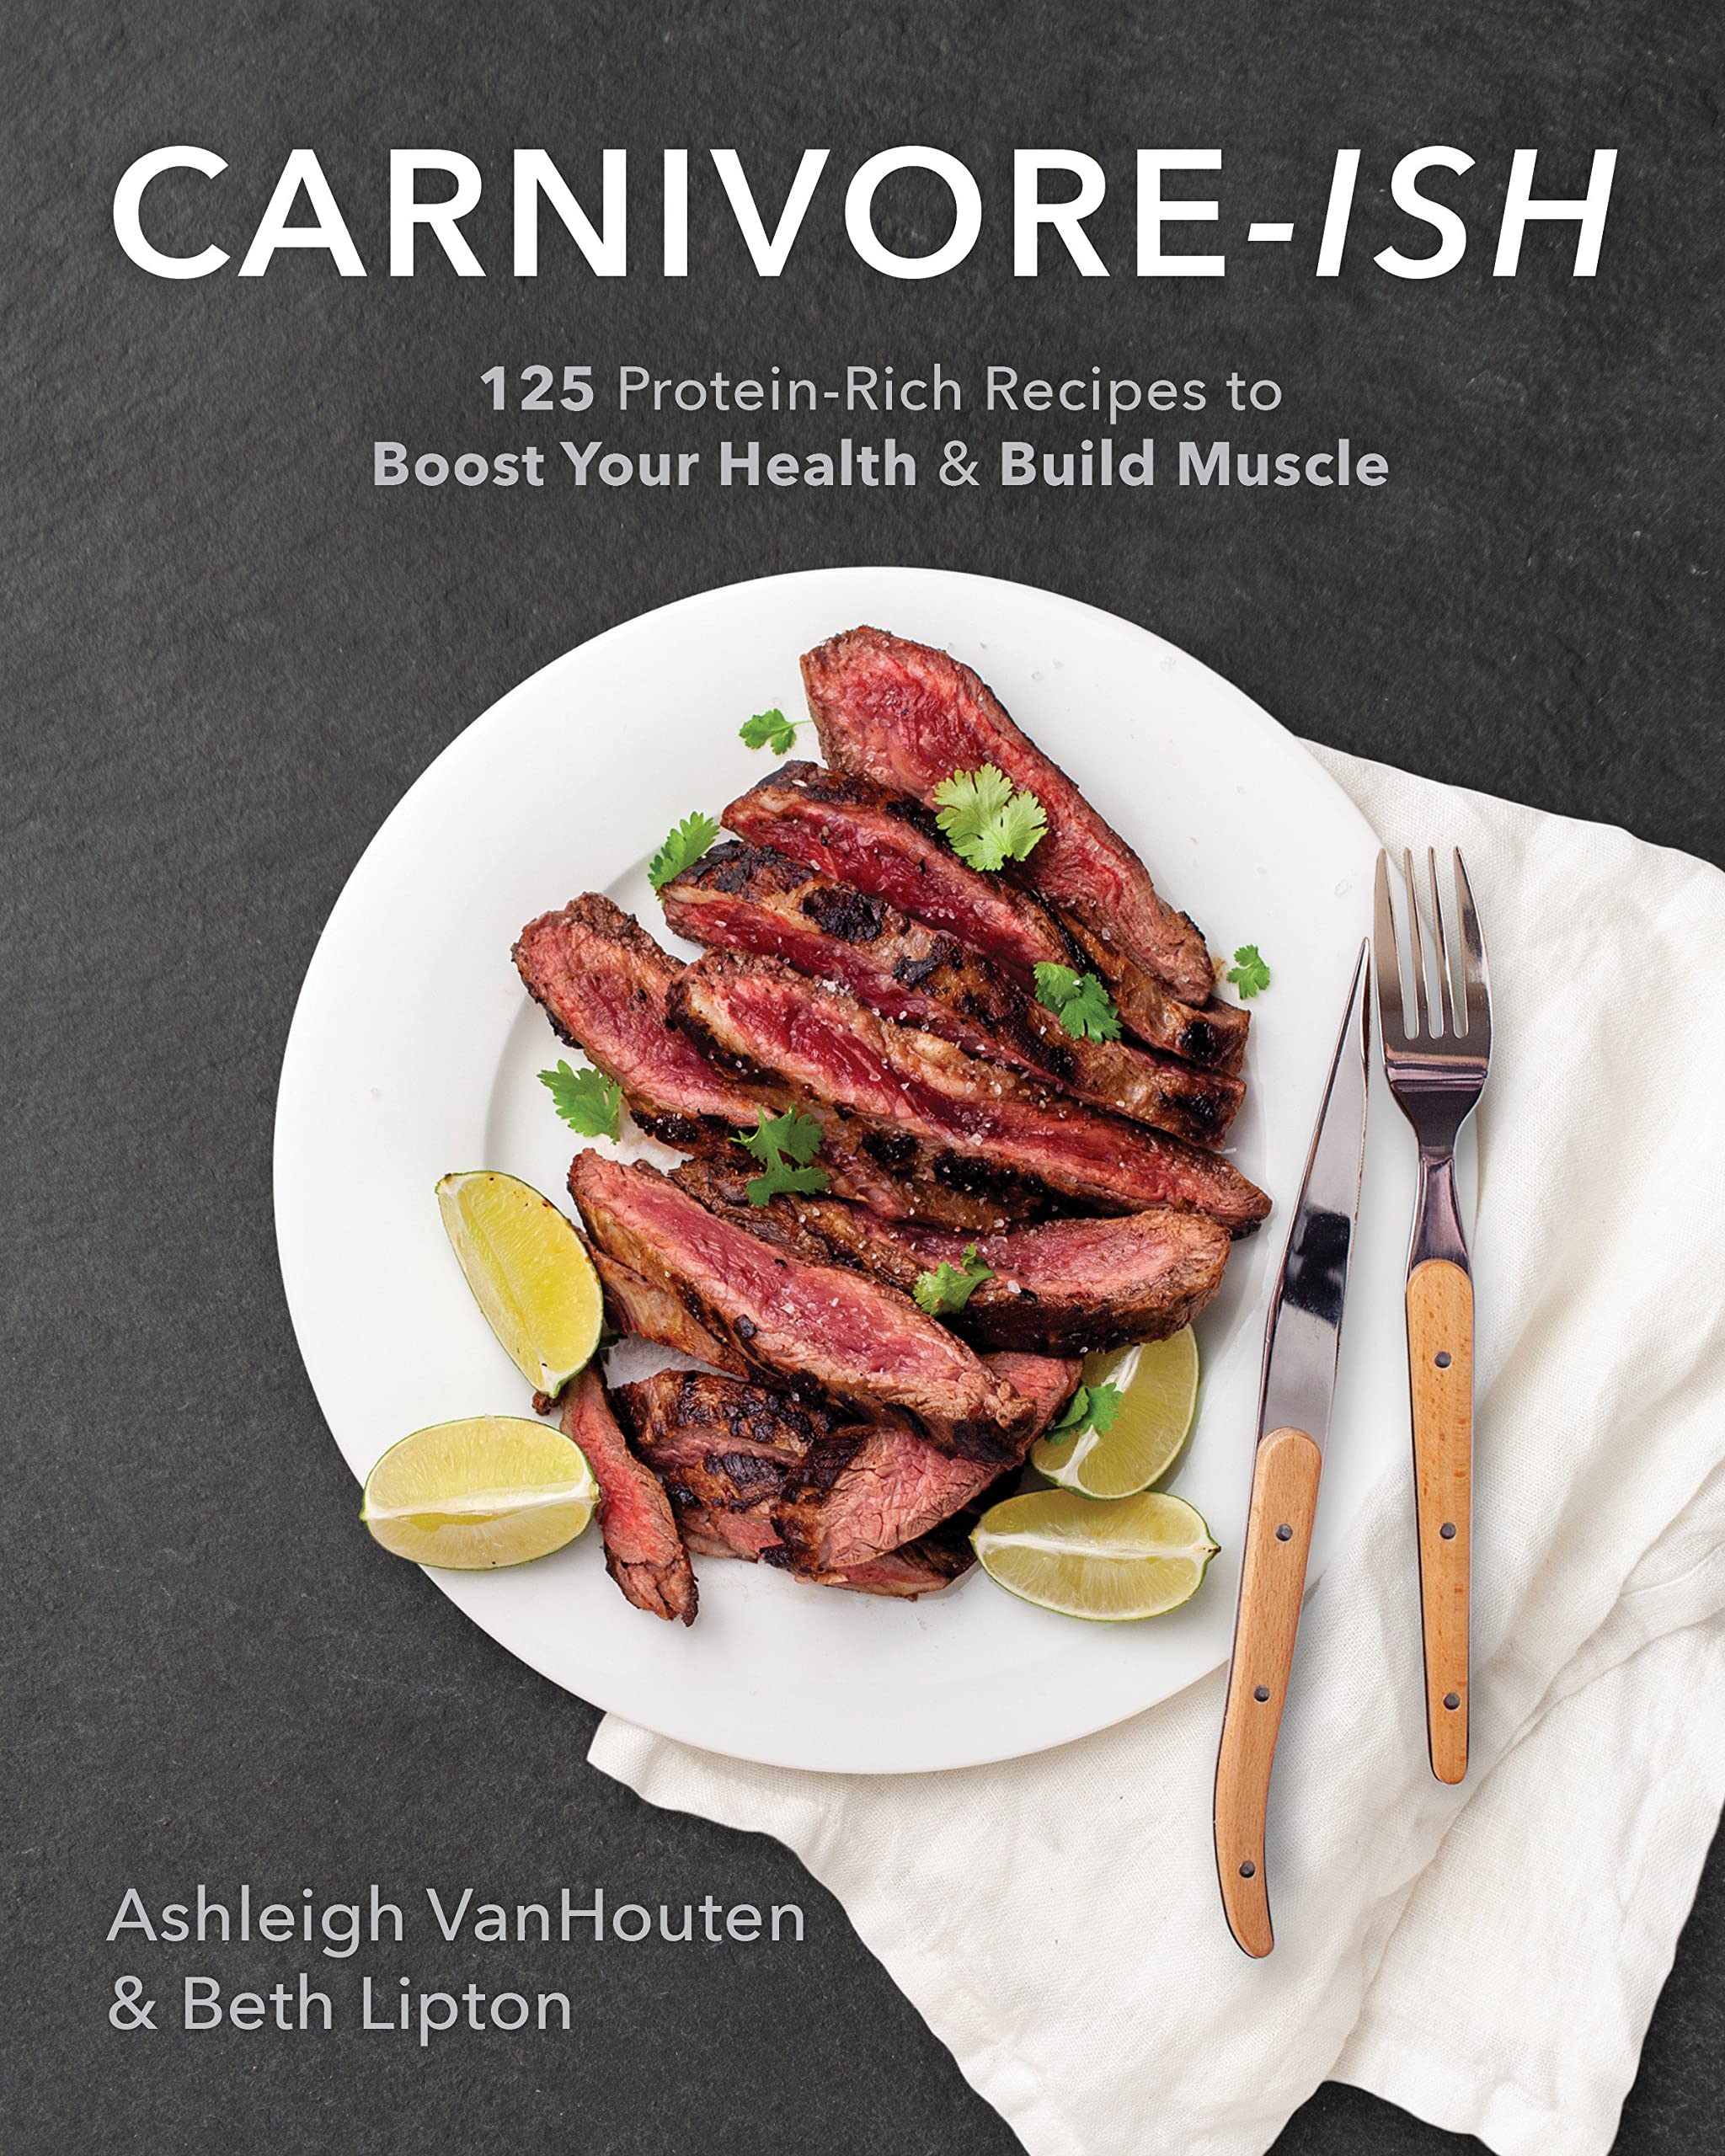 Carnivore-Ish: 125 Protein-Rich Recipes to Boost Your Health and Build Muscle - SureShot Books Publishing LLC